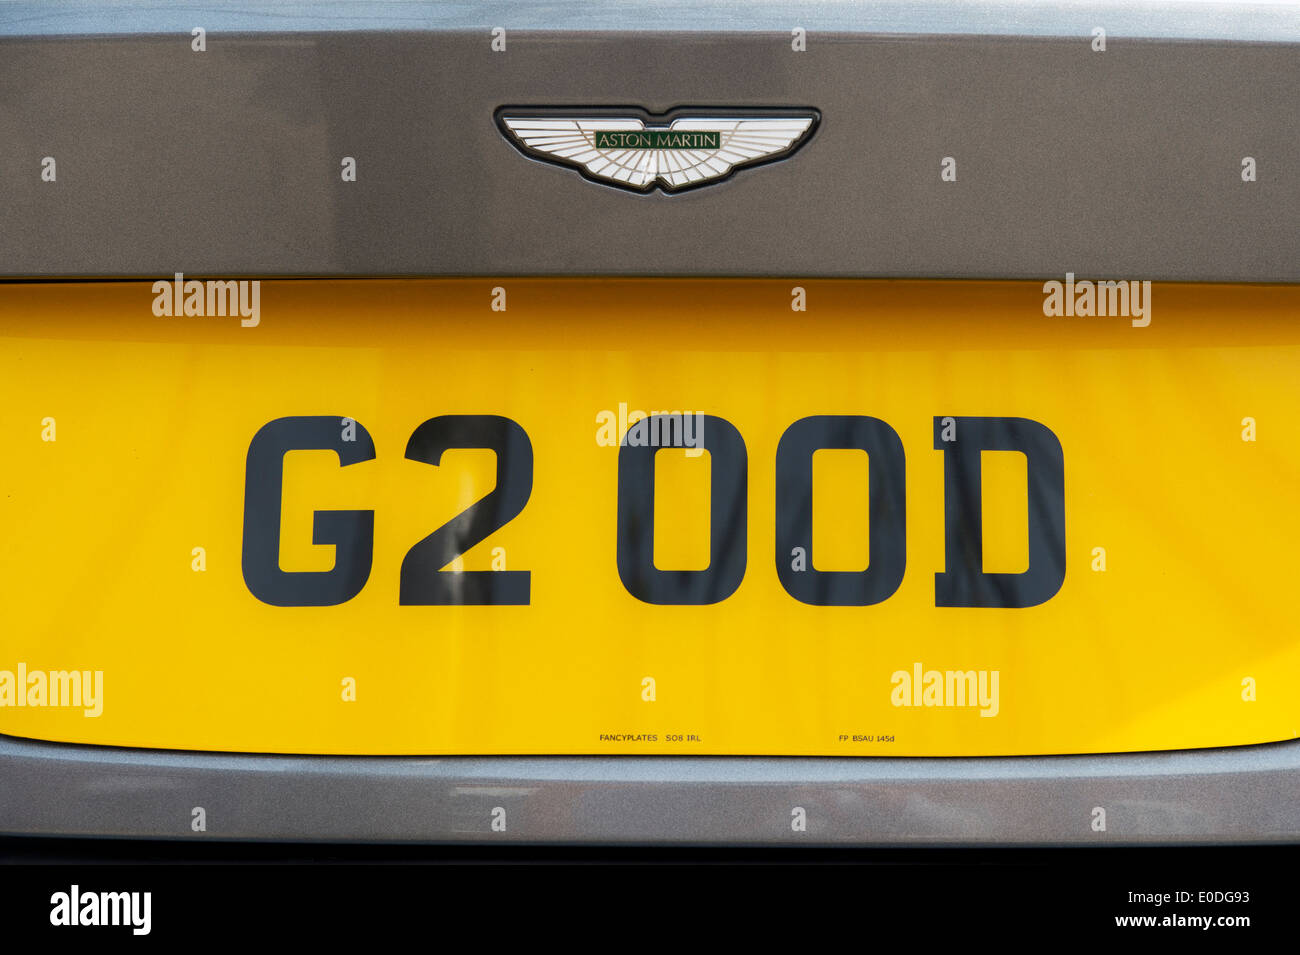 Aston Martin DB9 G2 OOD number plate Stock Photo